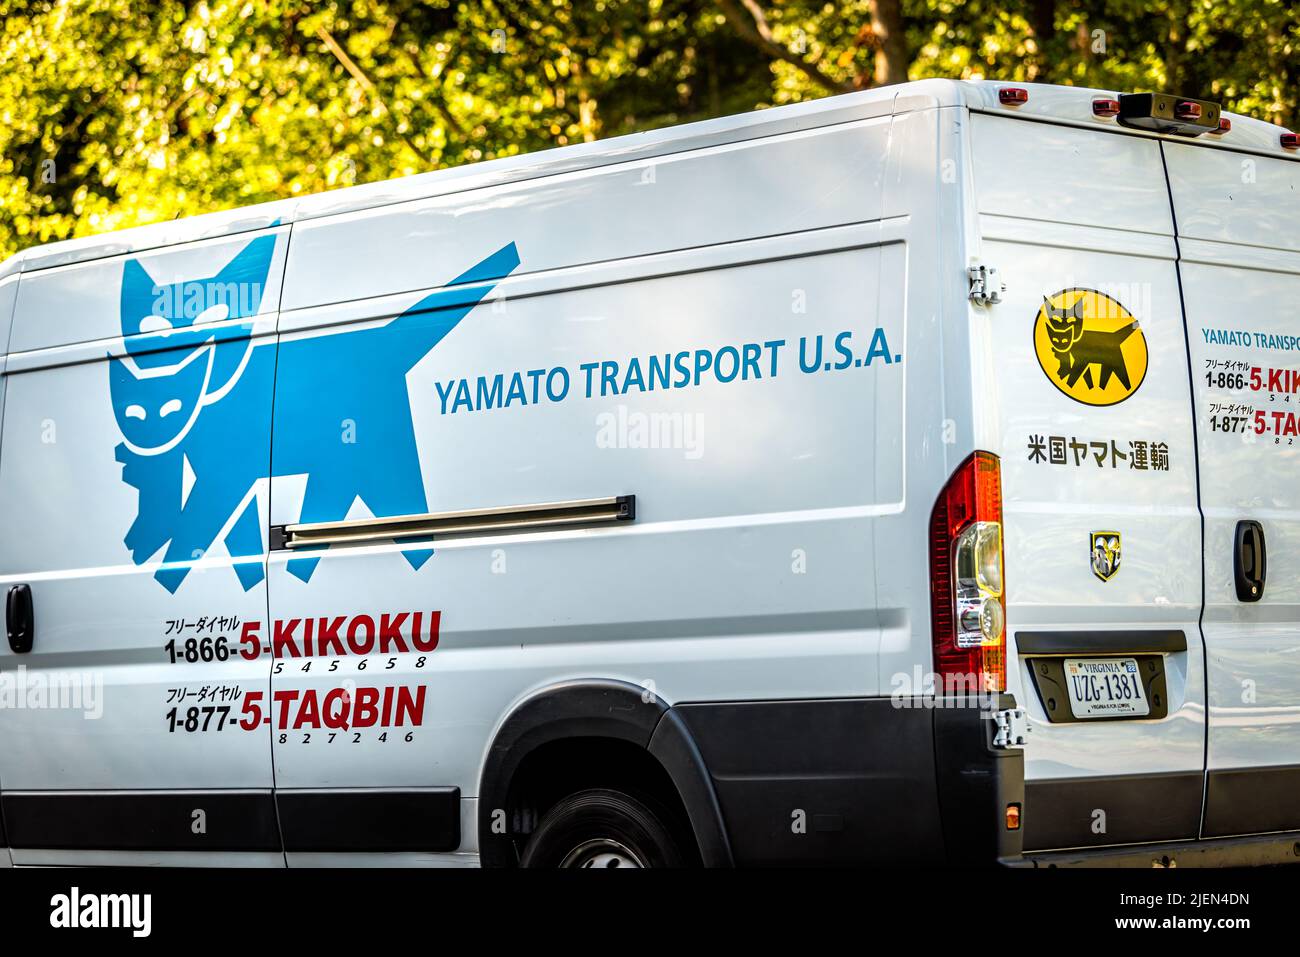 Richmond, USA - October 18, 2021: Highway road in Virginia with car van for Yamato transport Japanese delivery company with cat logo Stock Photo